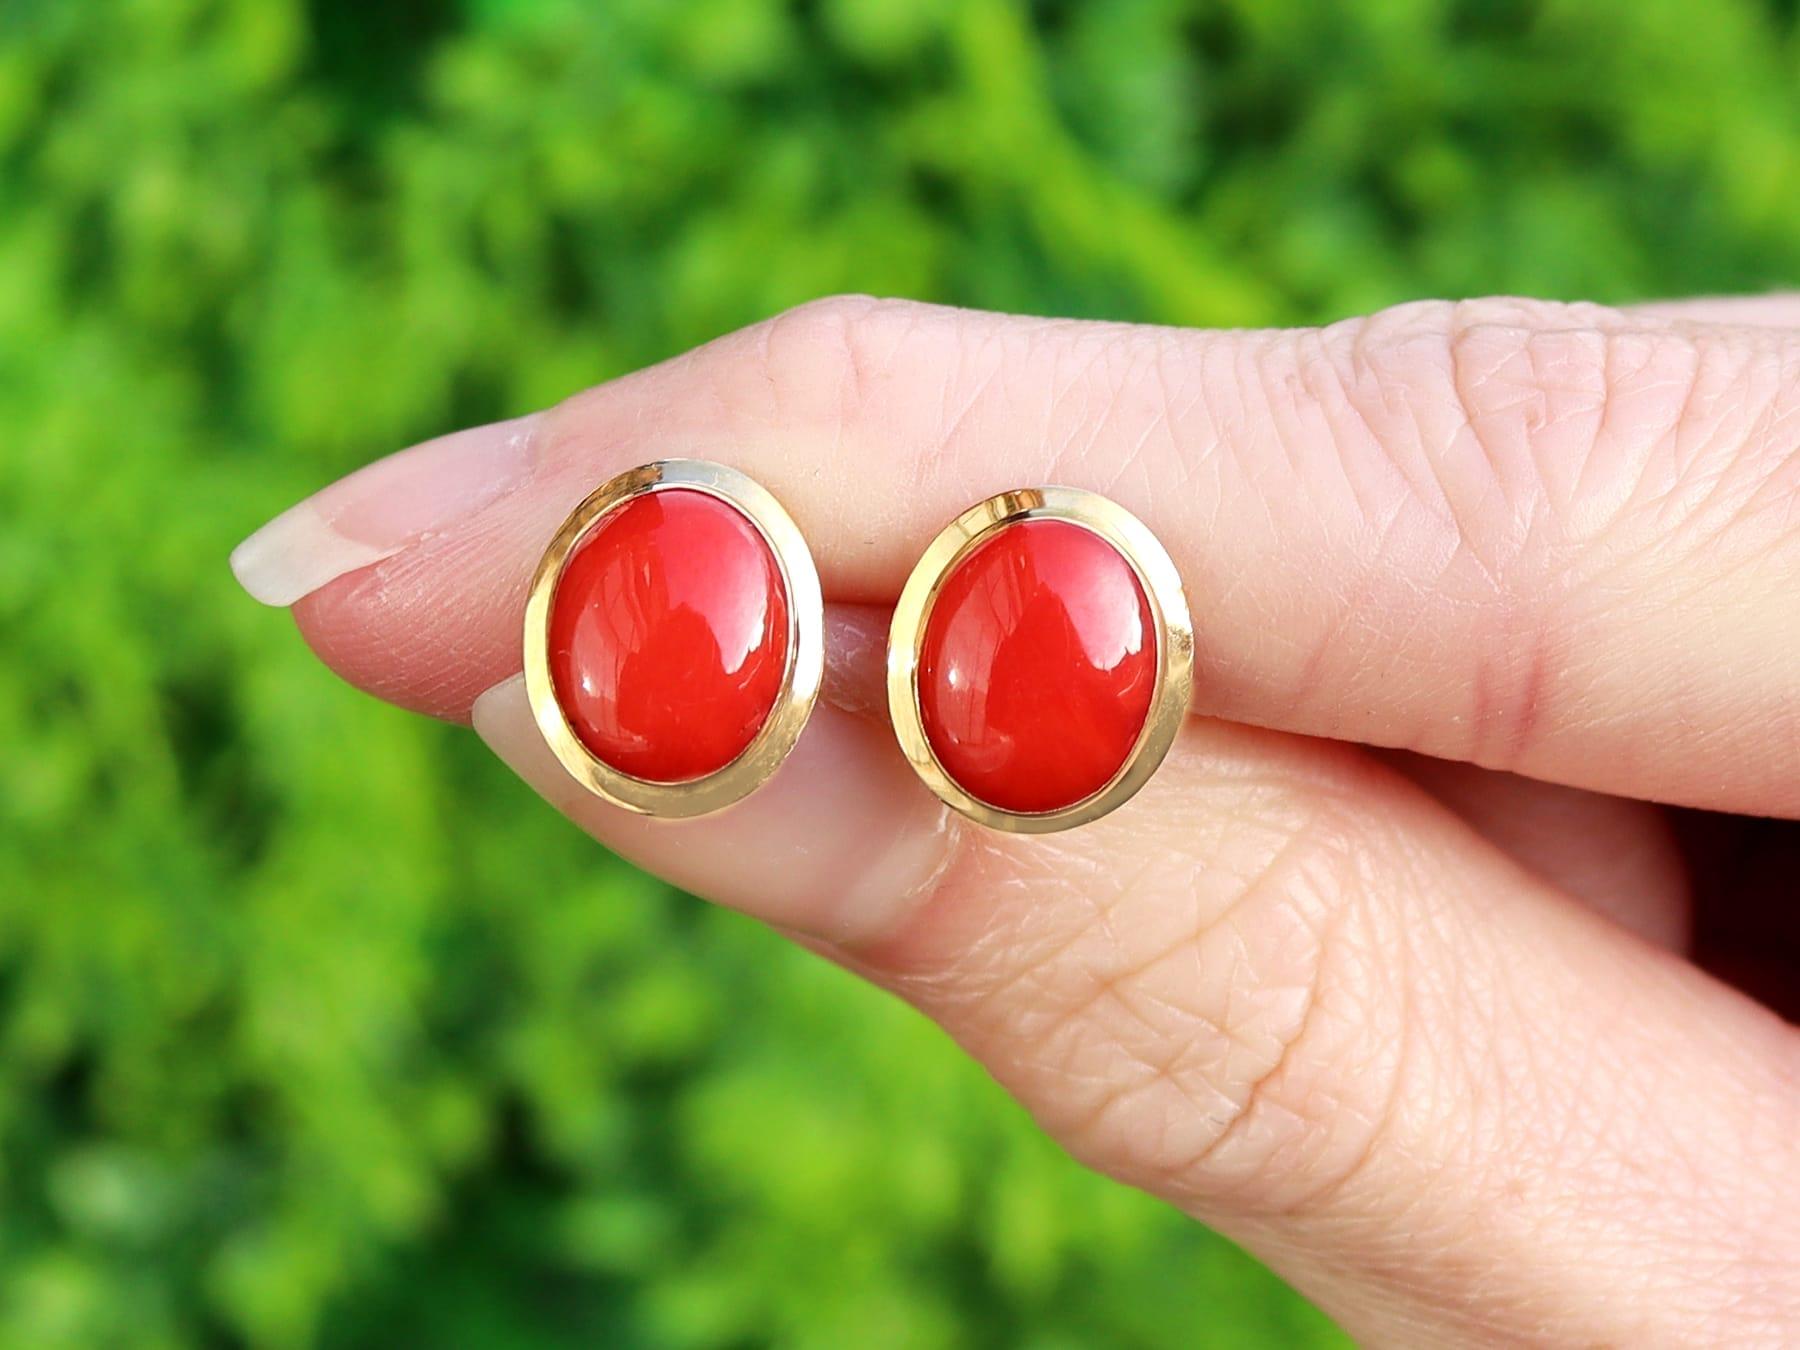 An impressive pair of vintage Italian 4.50 carat red coral and 18k yellow gold stud earrings; part of our diverse vintage estate jewelry collections.

These fine and impressive Italian coral earrings have been crafted in 18k yellow gold.

Each oval